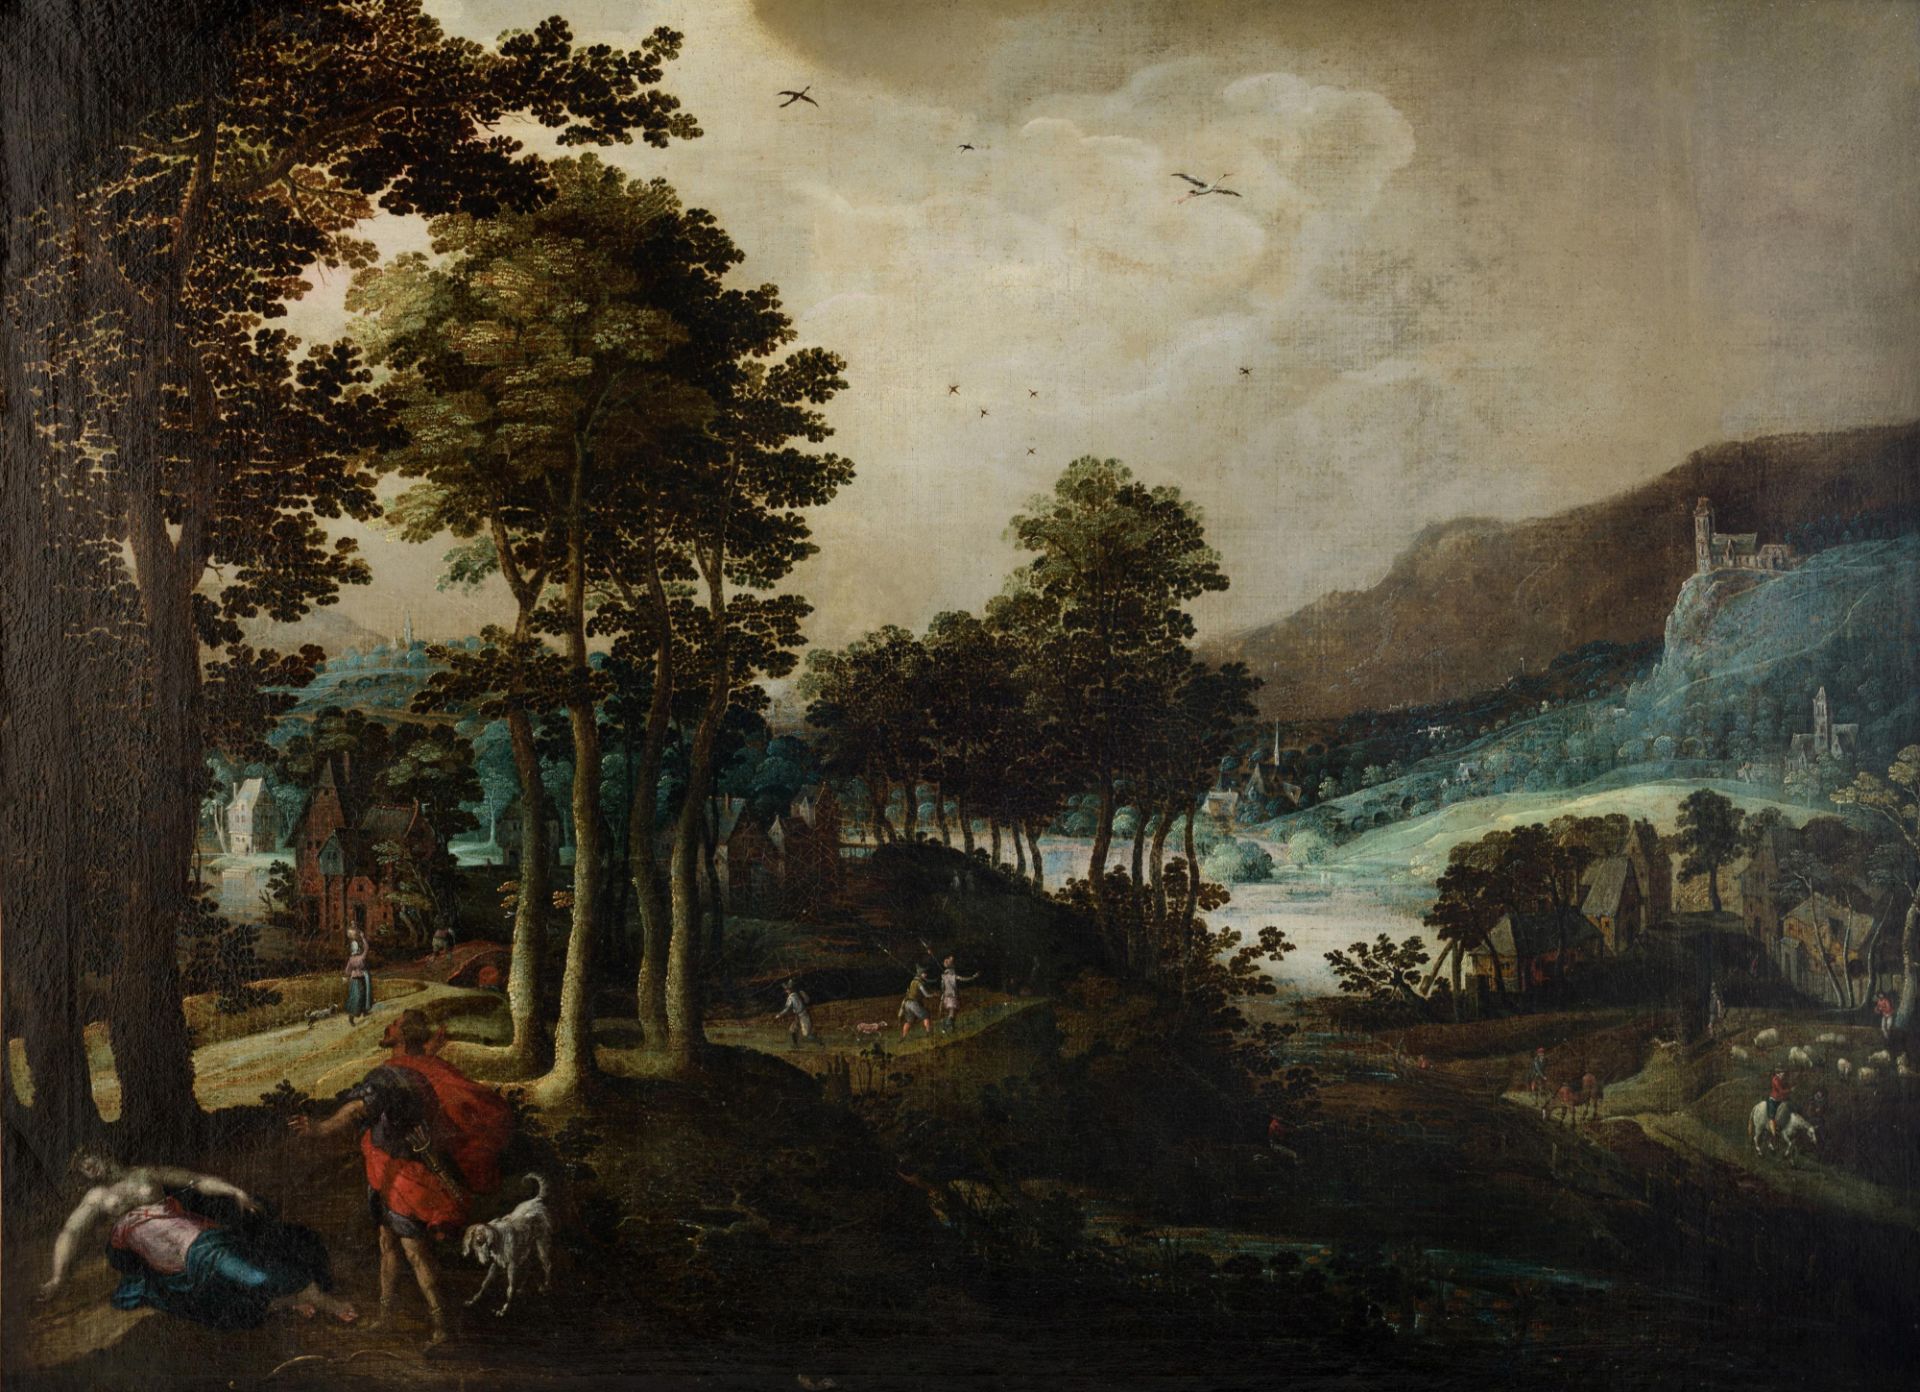 No visible signature, Cephalus and Procris in a landscape, the Southern Netherlands, late 16thC - ea